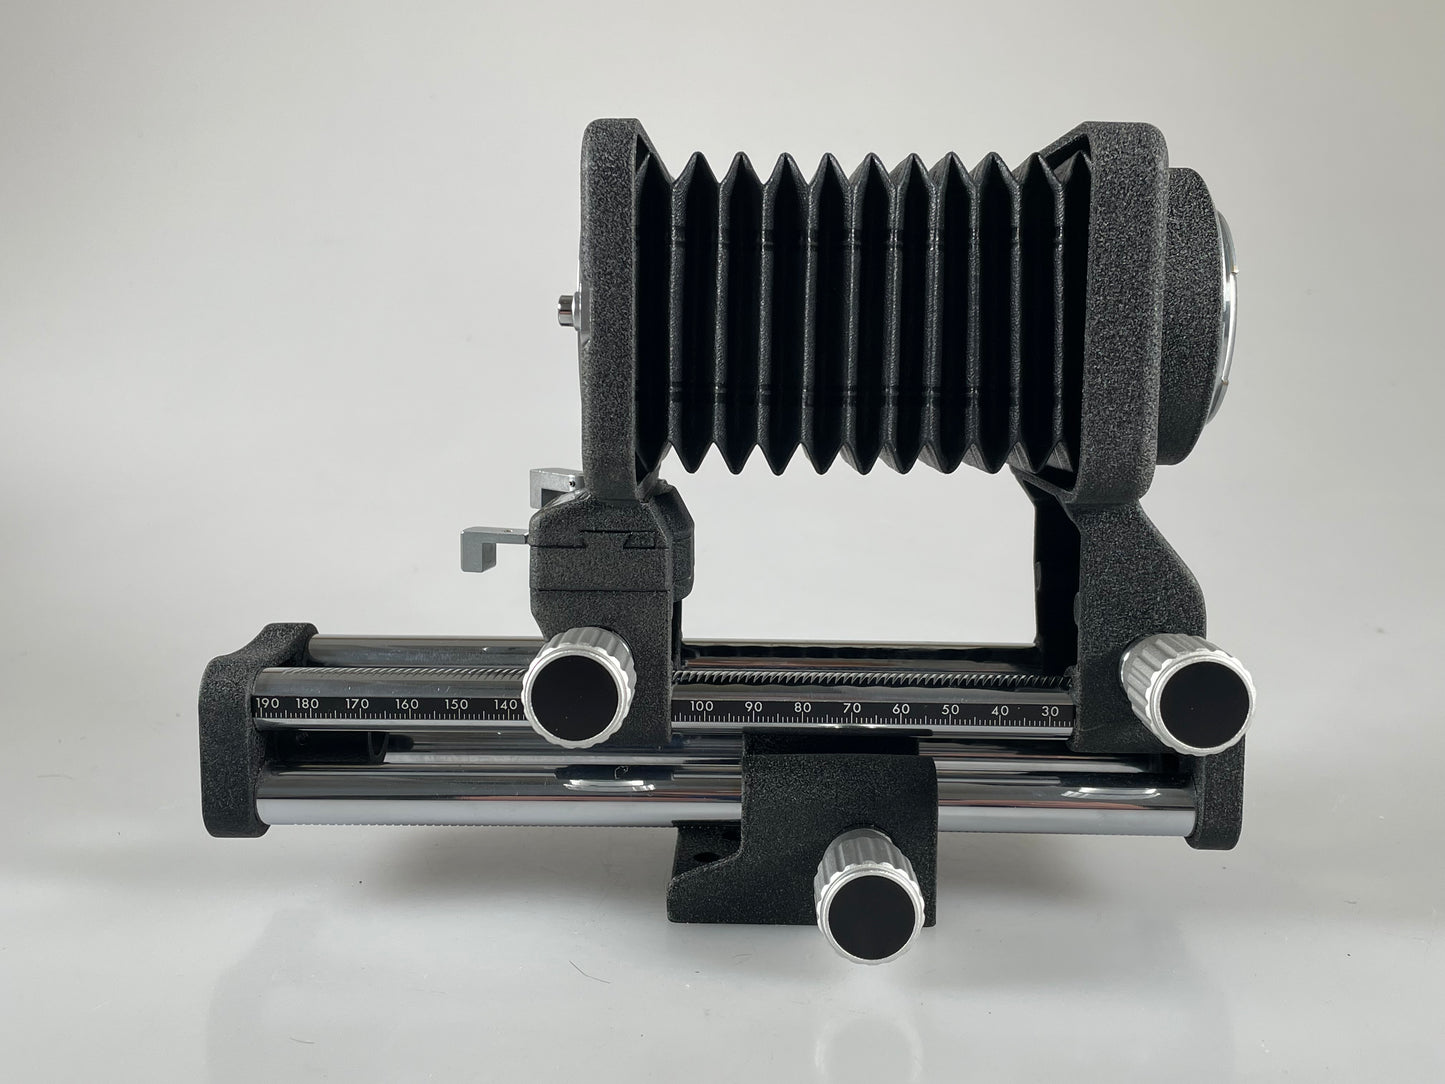 Nikon PS-4 Slide Copying Adapter with PB-4 Bellows